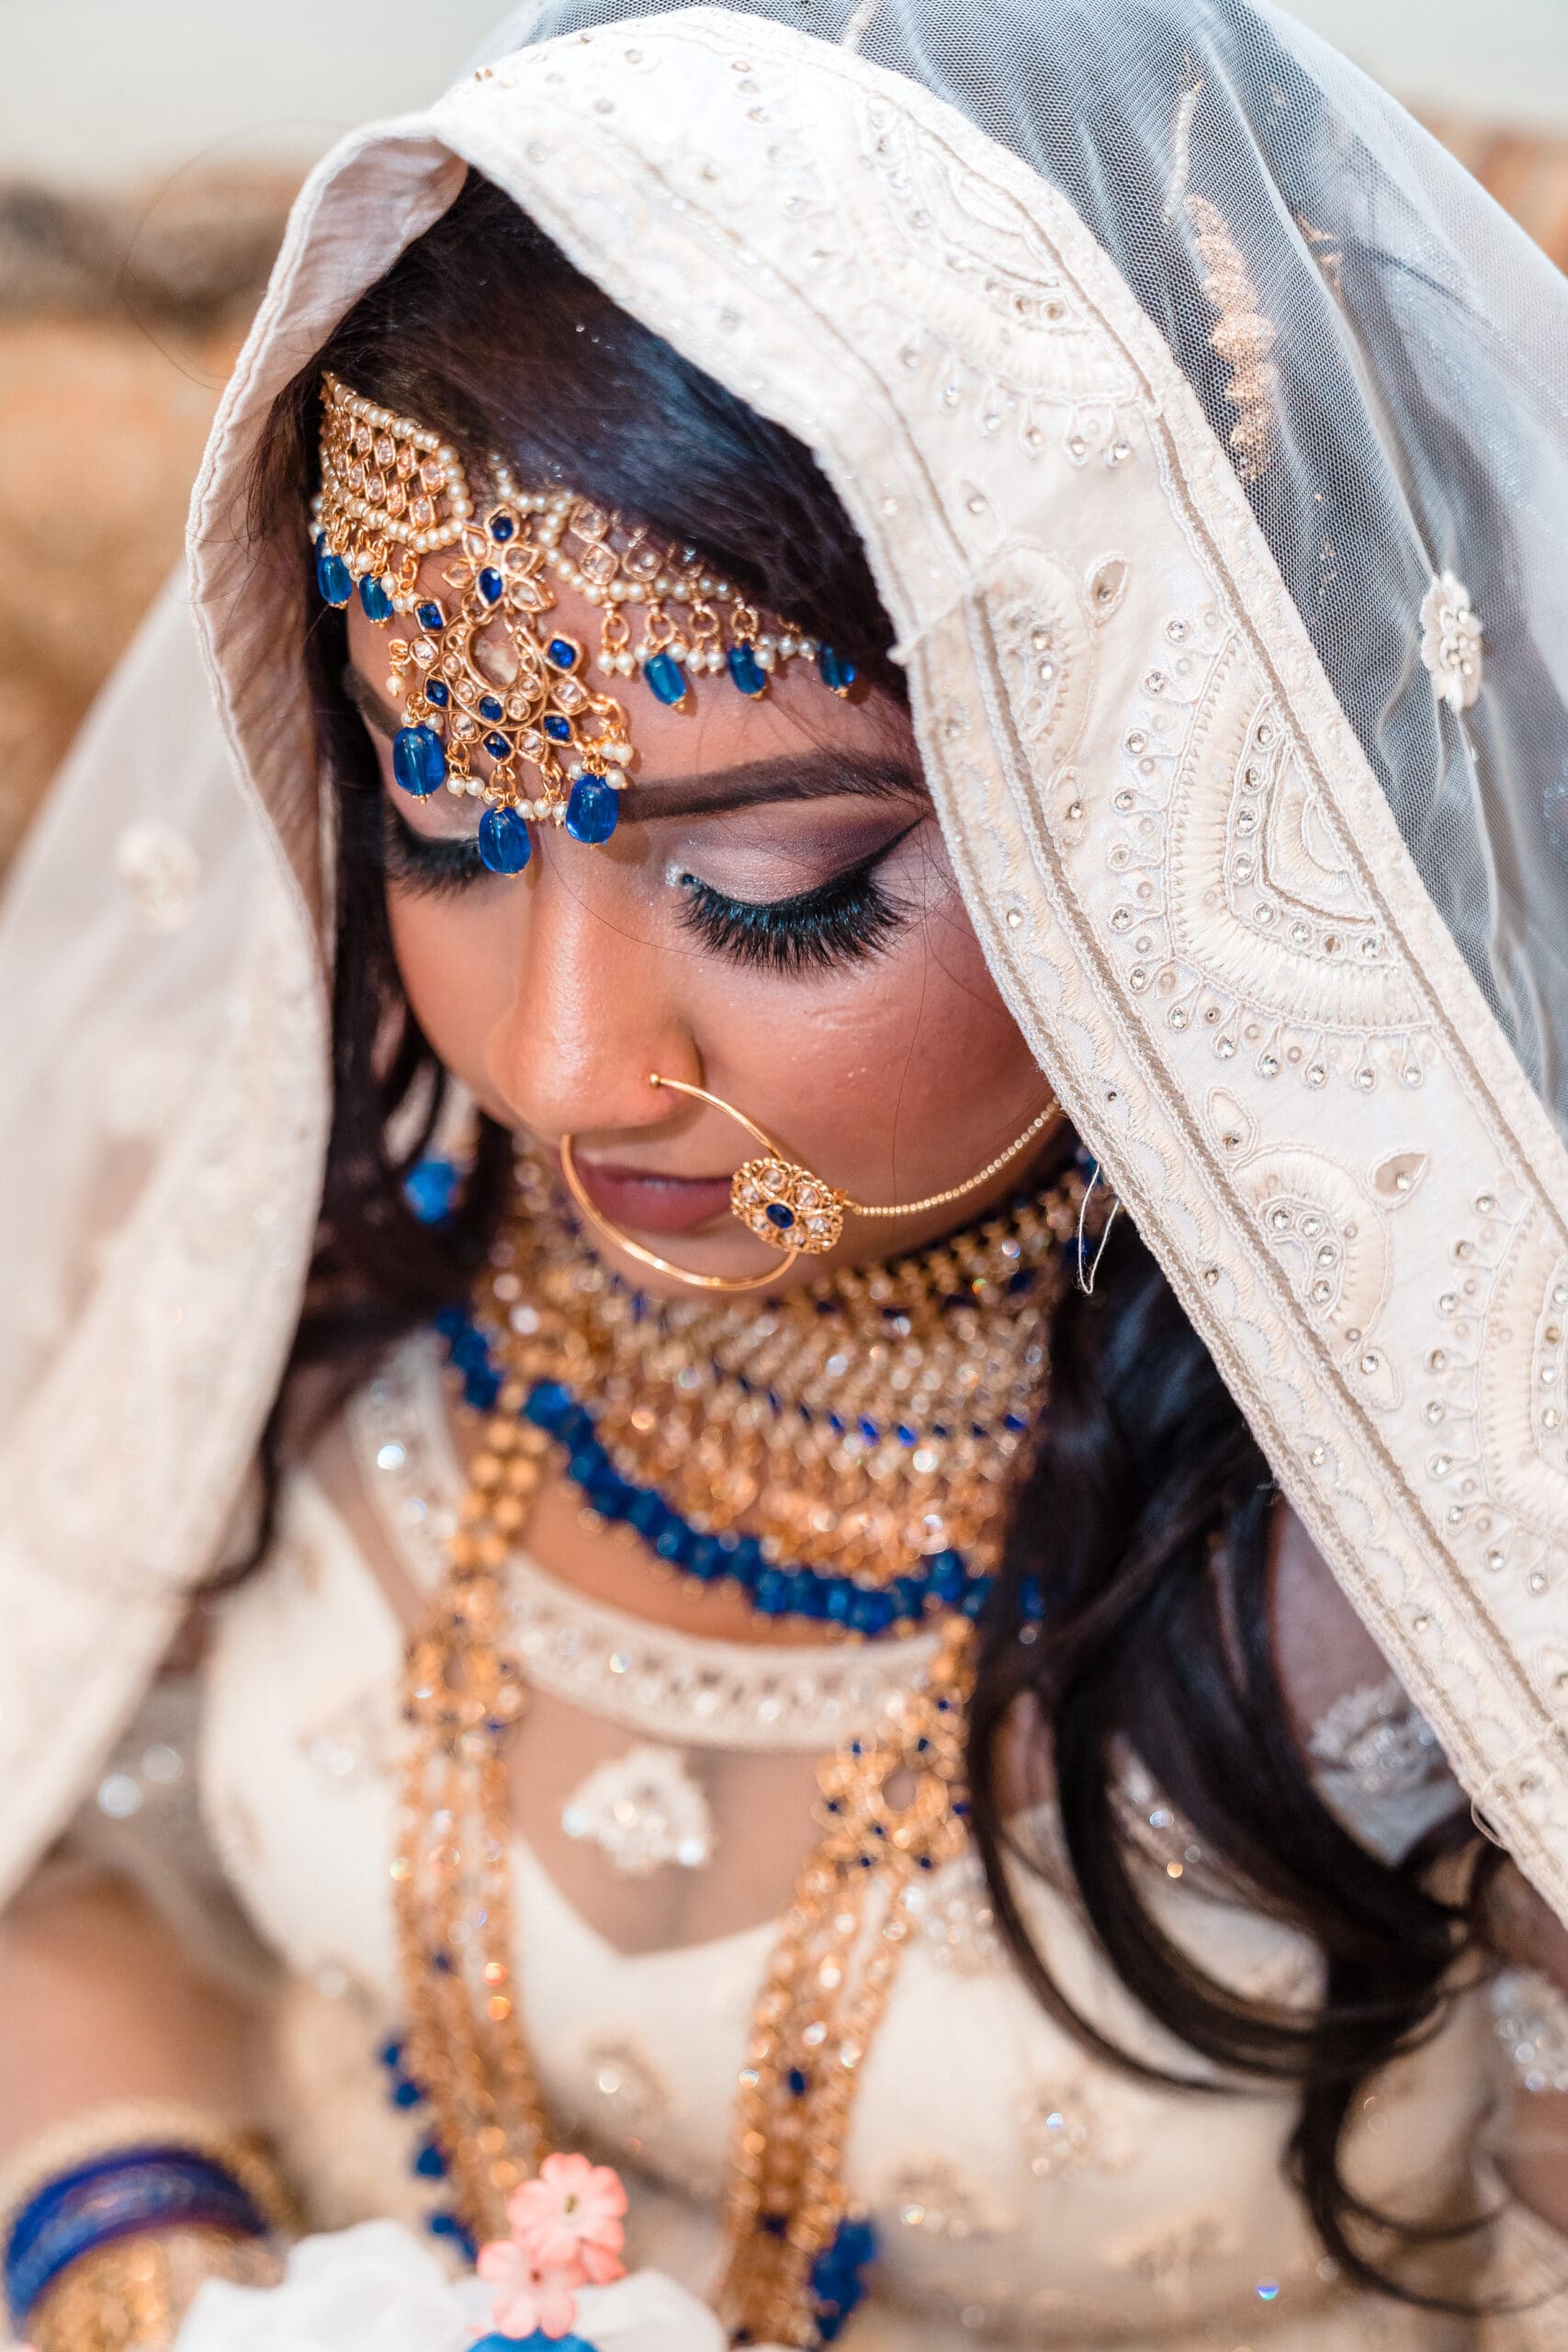 Indian bride in traditional wedding attire, wearing a white dress embellished with small jewels, adorned with intricate gold and blue jewelry